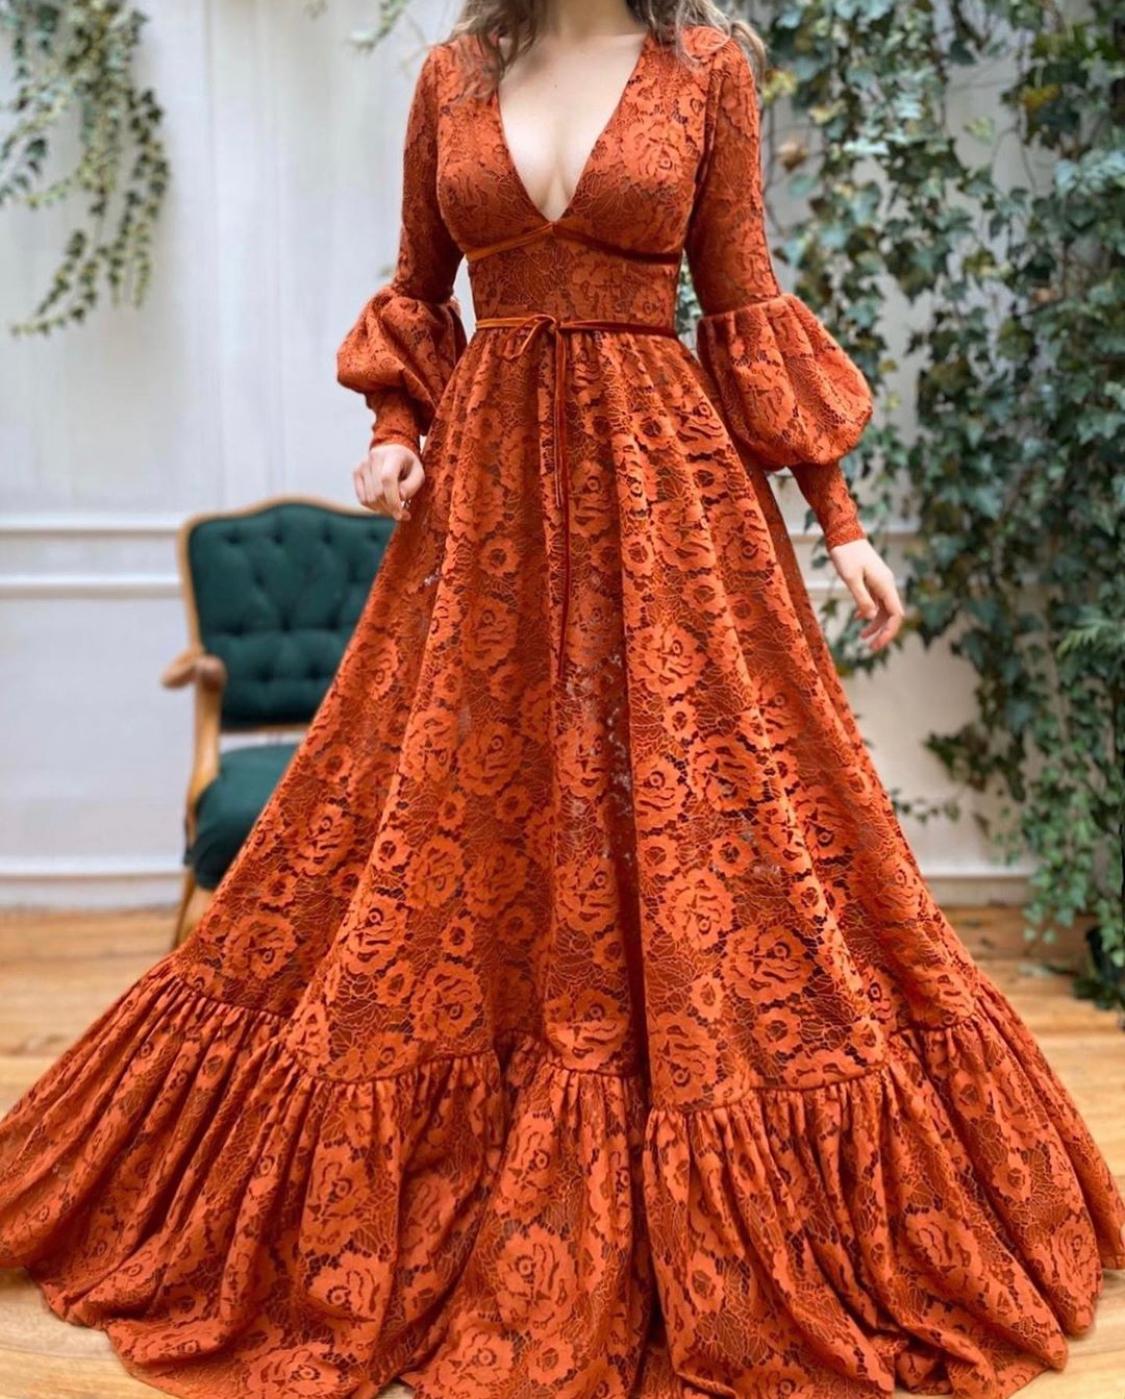 Orange A-Line dress with v-neck and long sleeves